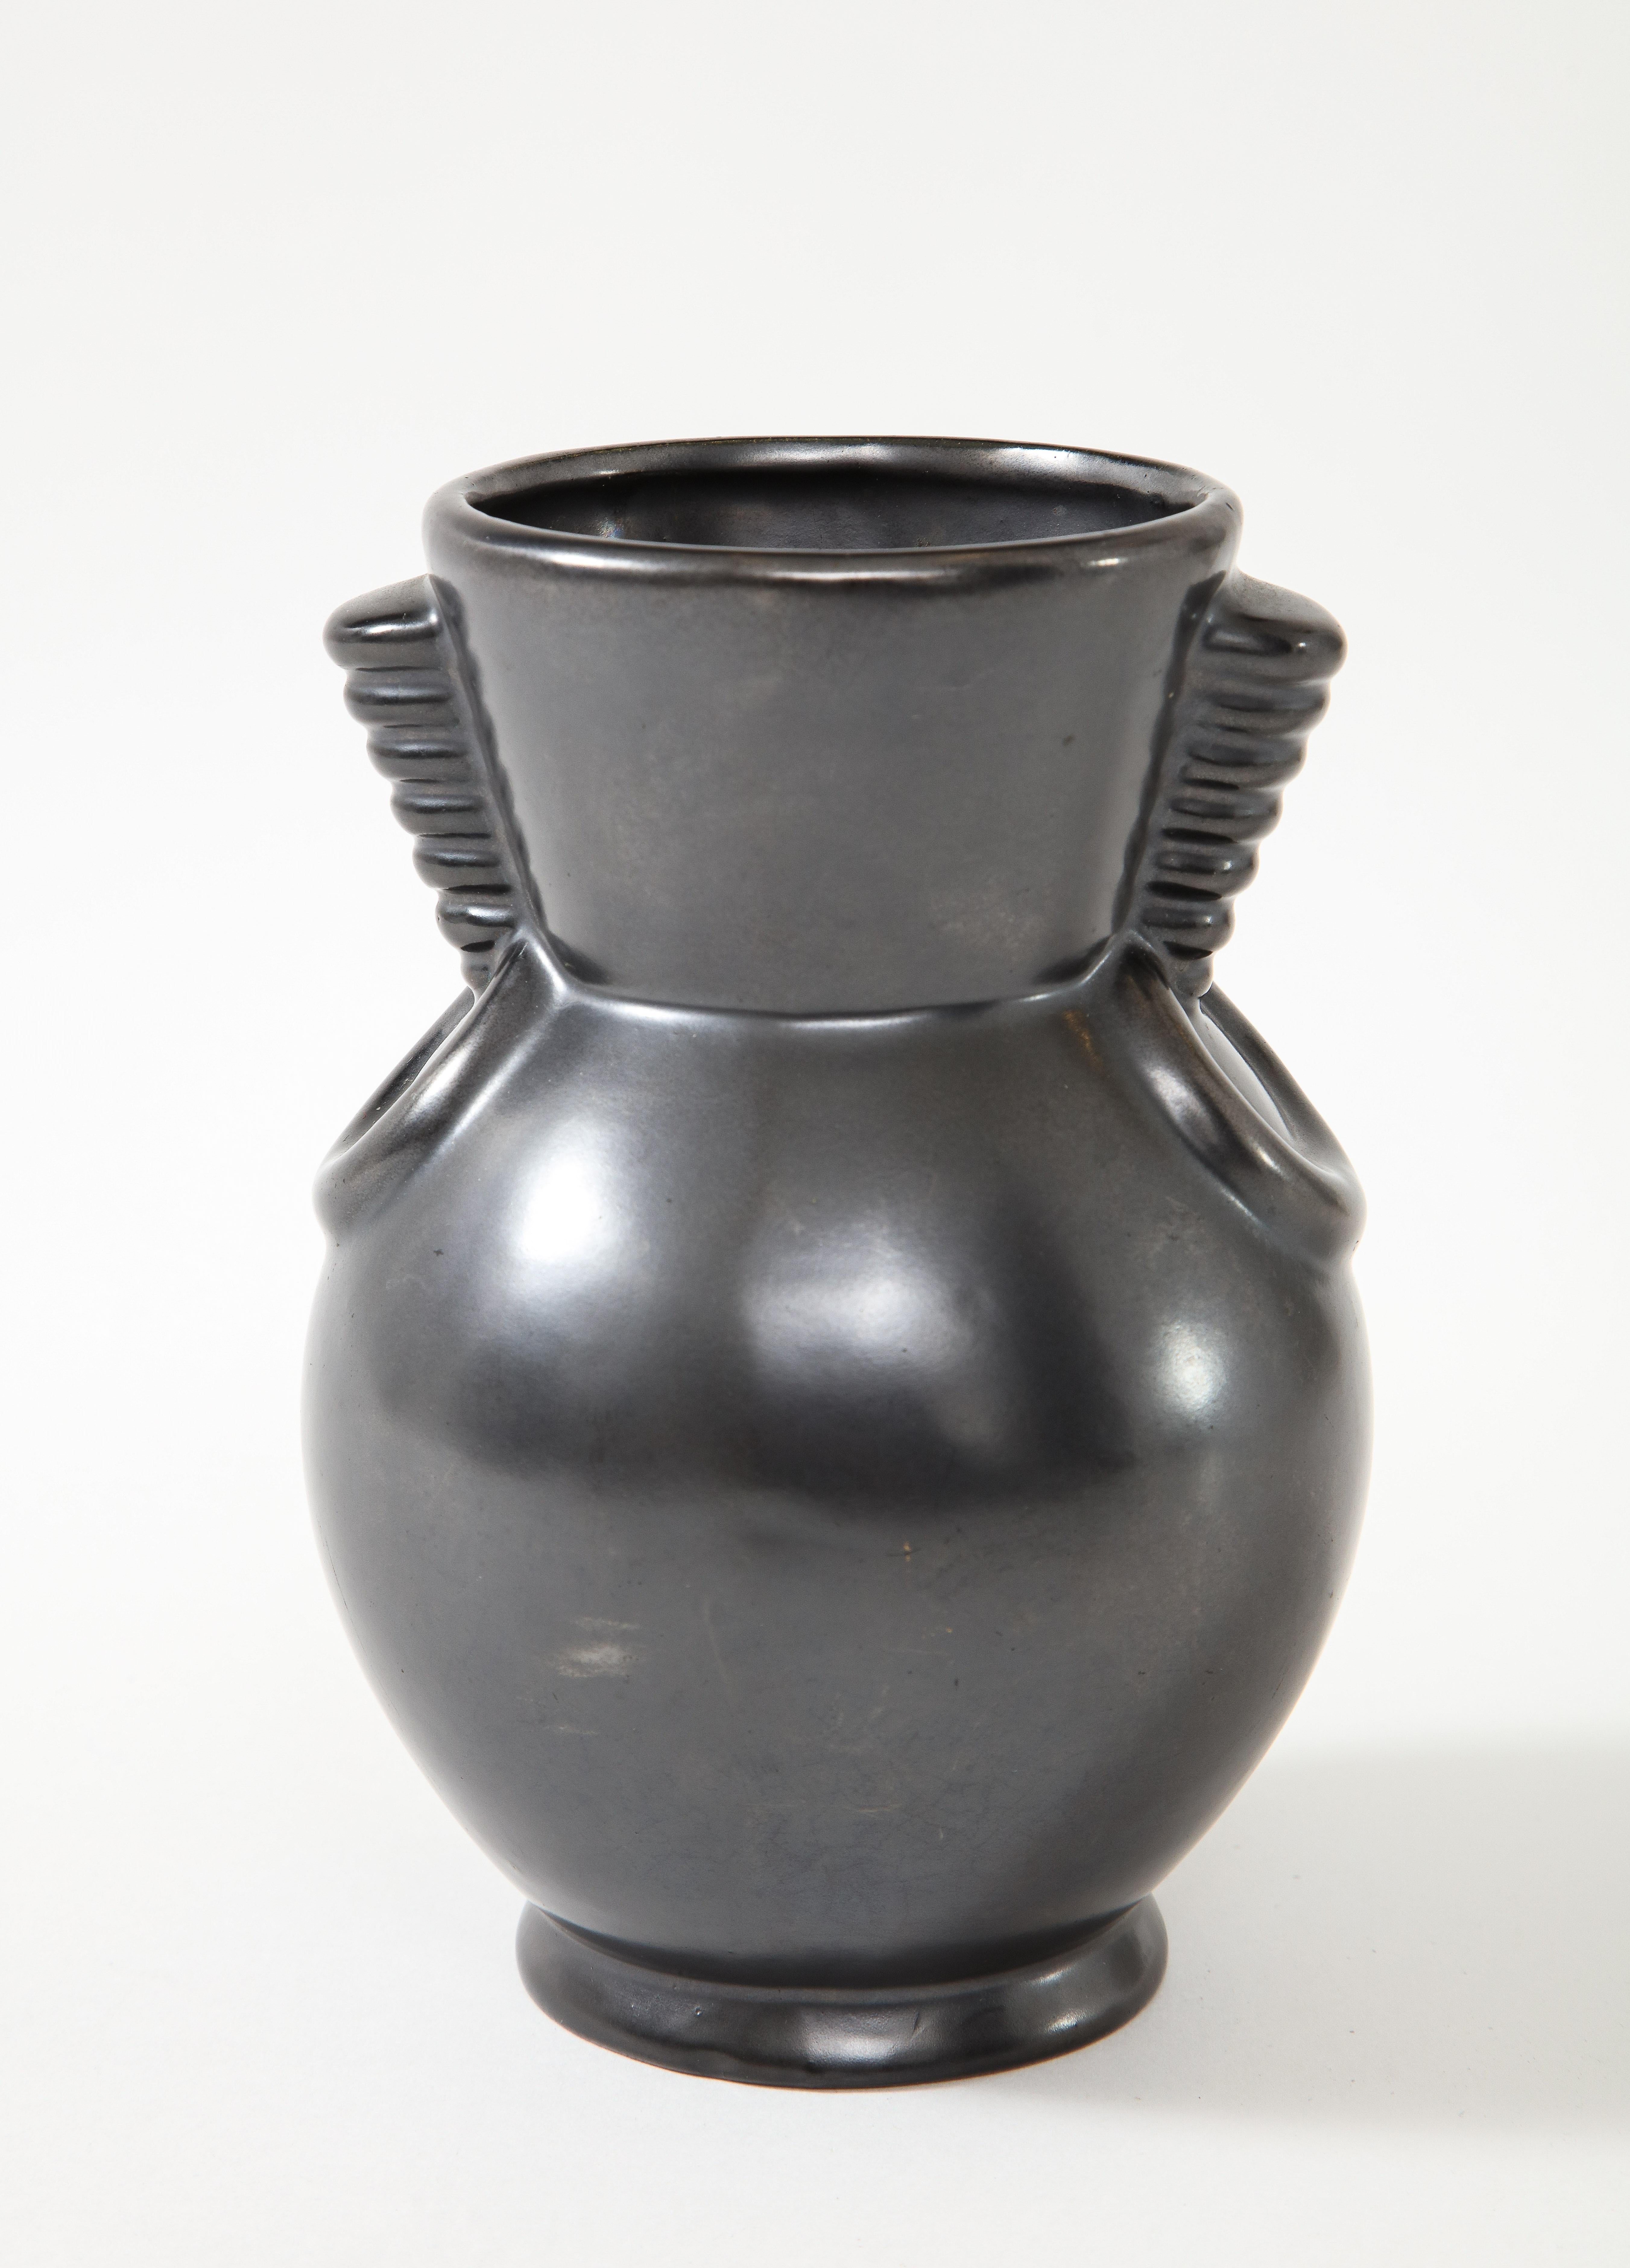 St. Clement, B. Leyalle, matte back vase, France, c. 1930-40's, signed & no.
Ceramic
Measures: Height 7 diameter 5.25 inches.